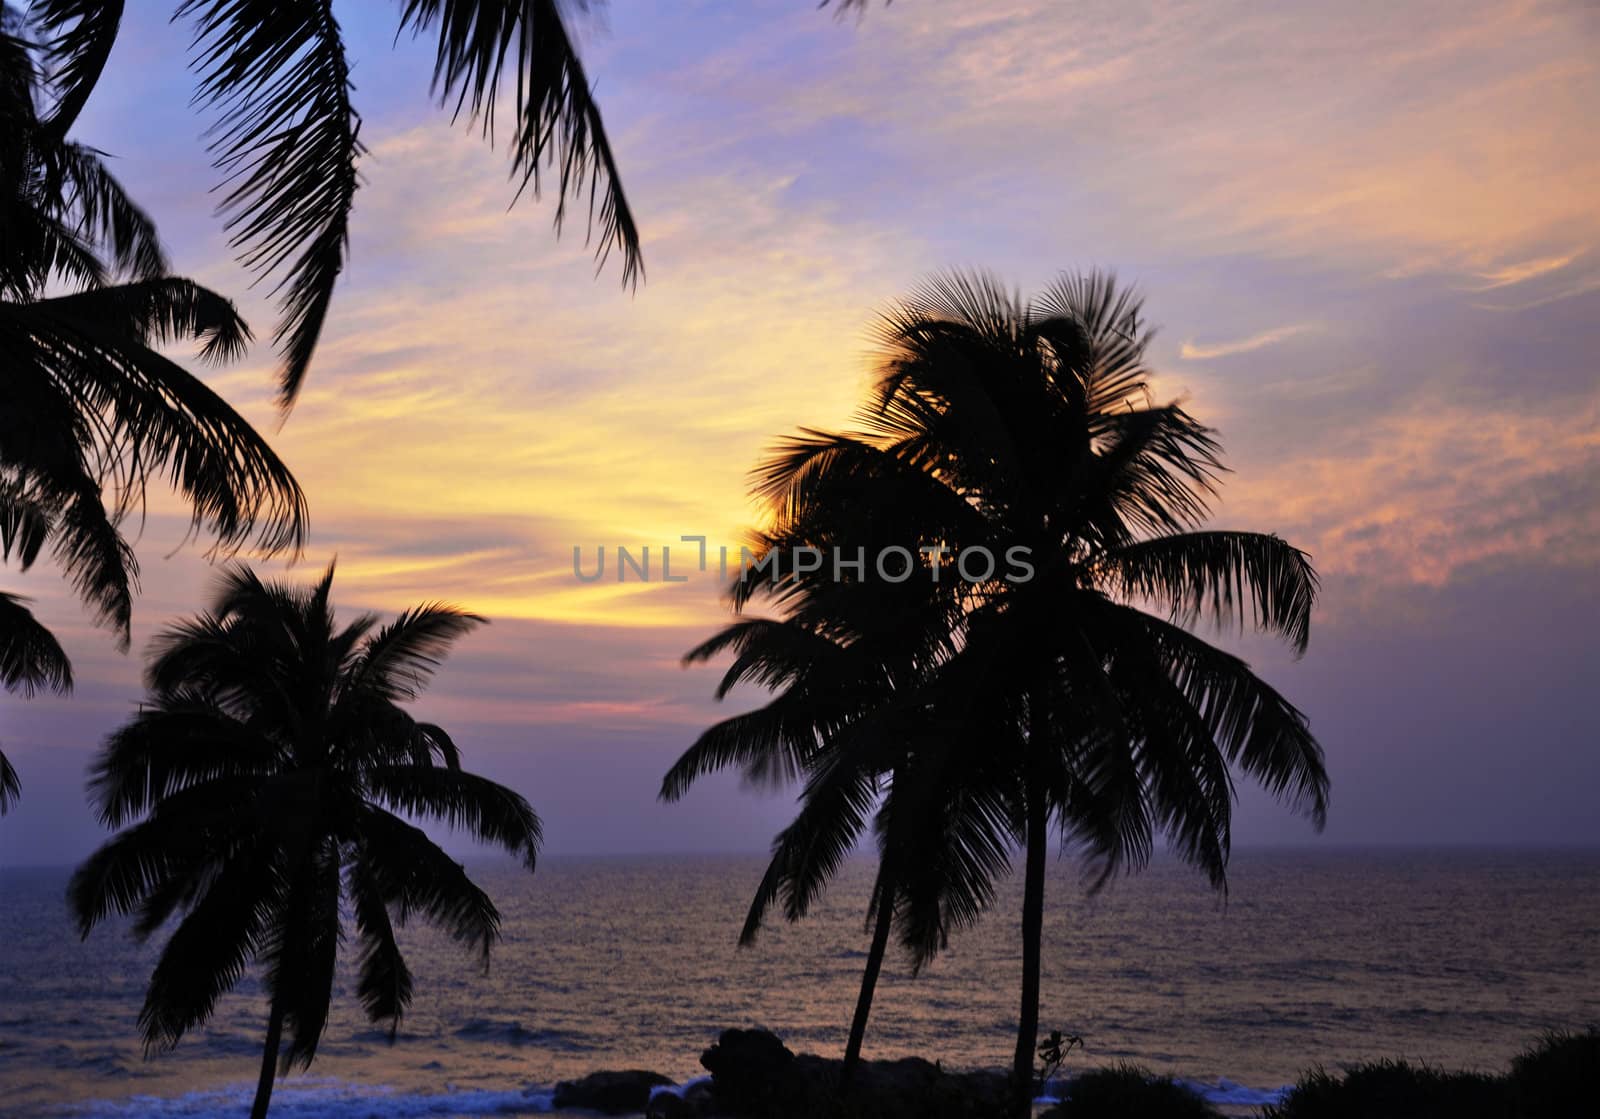 The silhouettes of palm trees on a beautiful evening in Sri Lanka